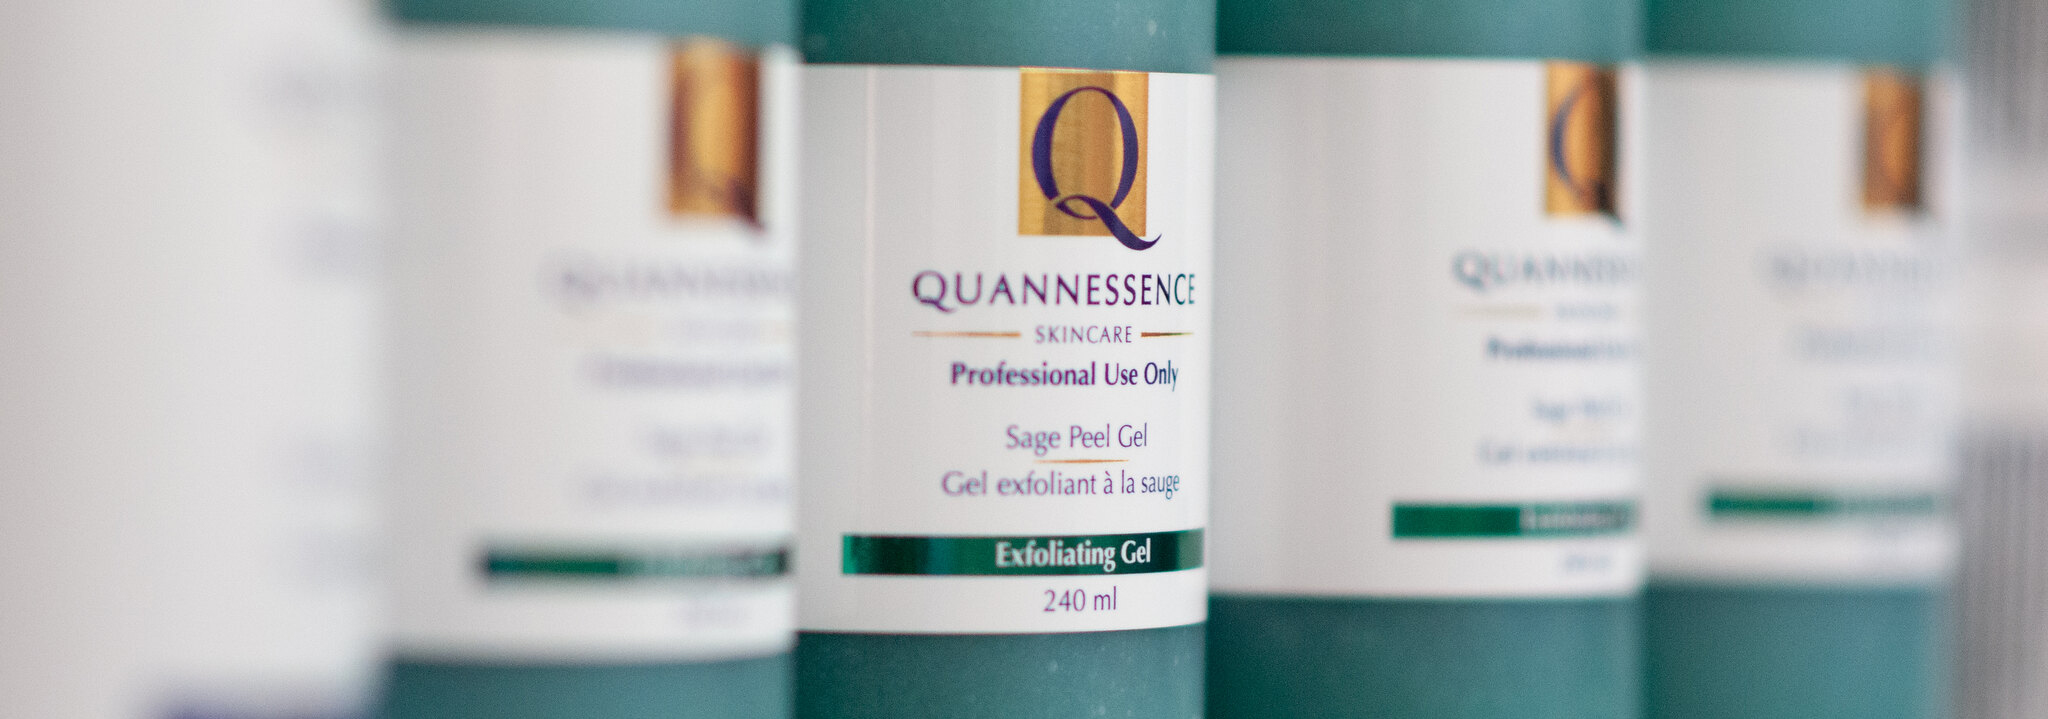 Quanessence product line